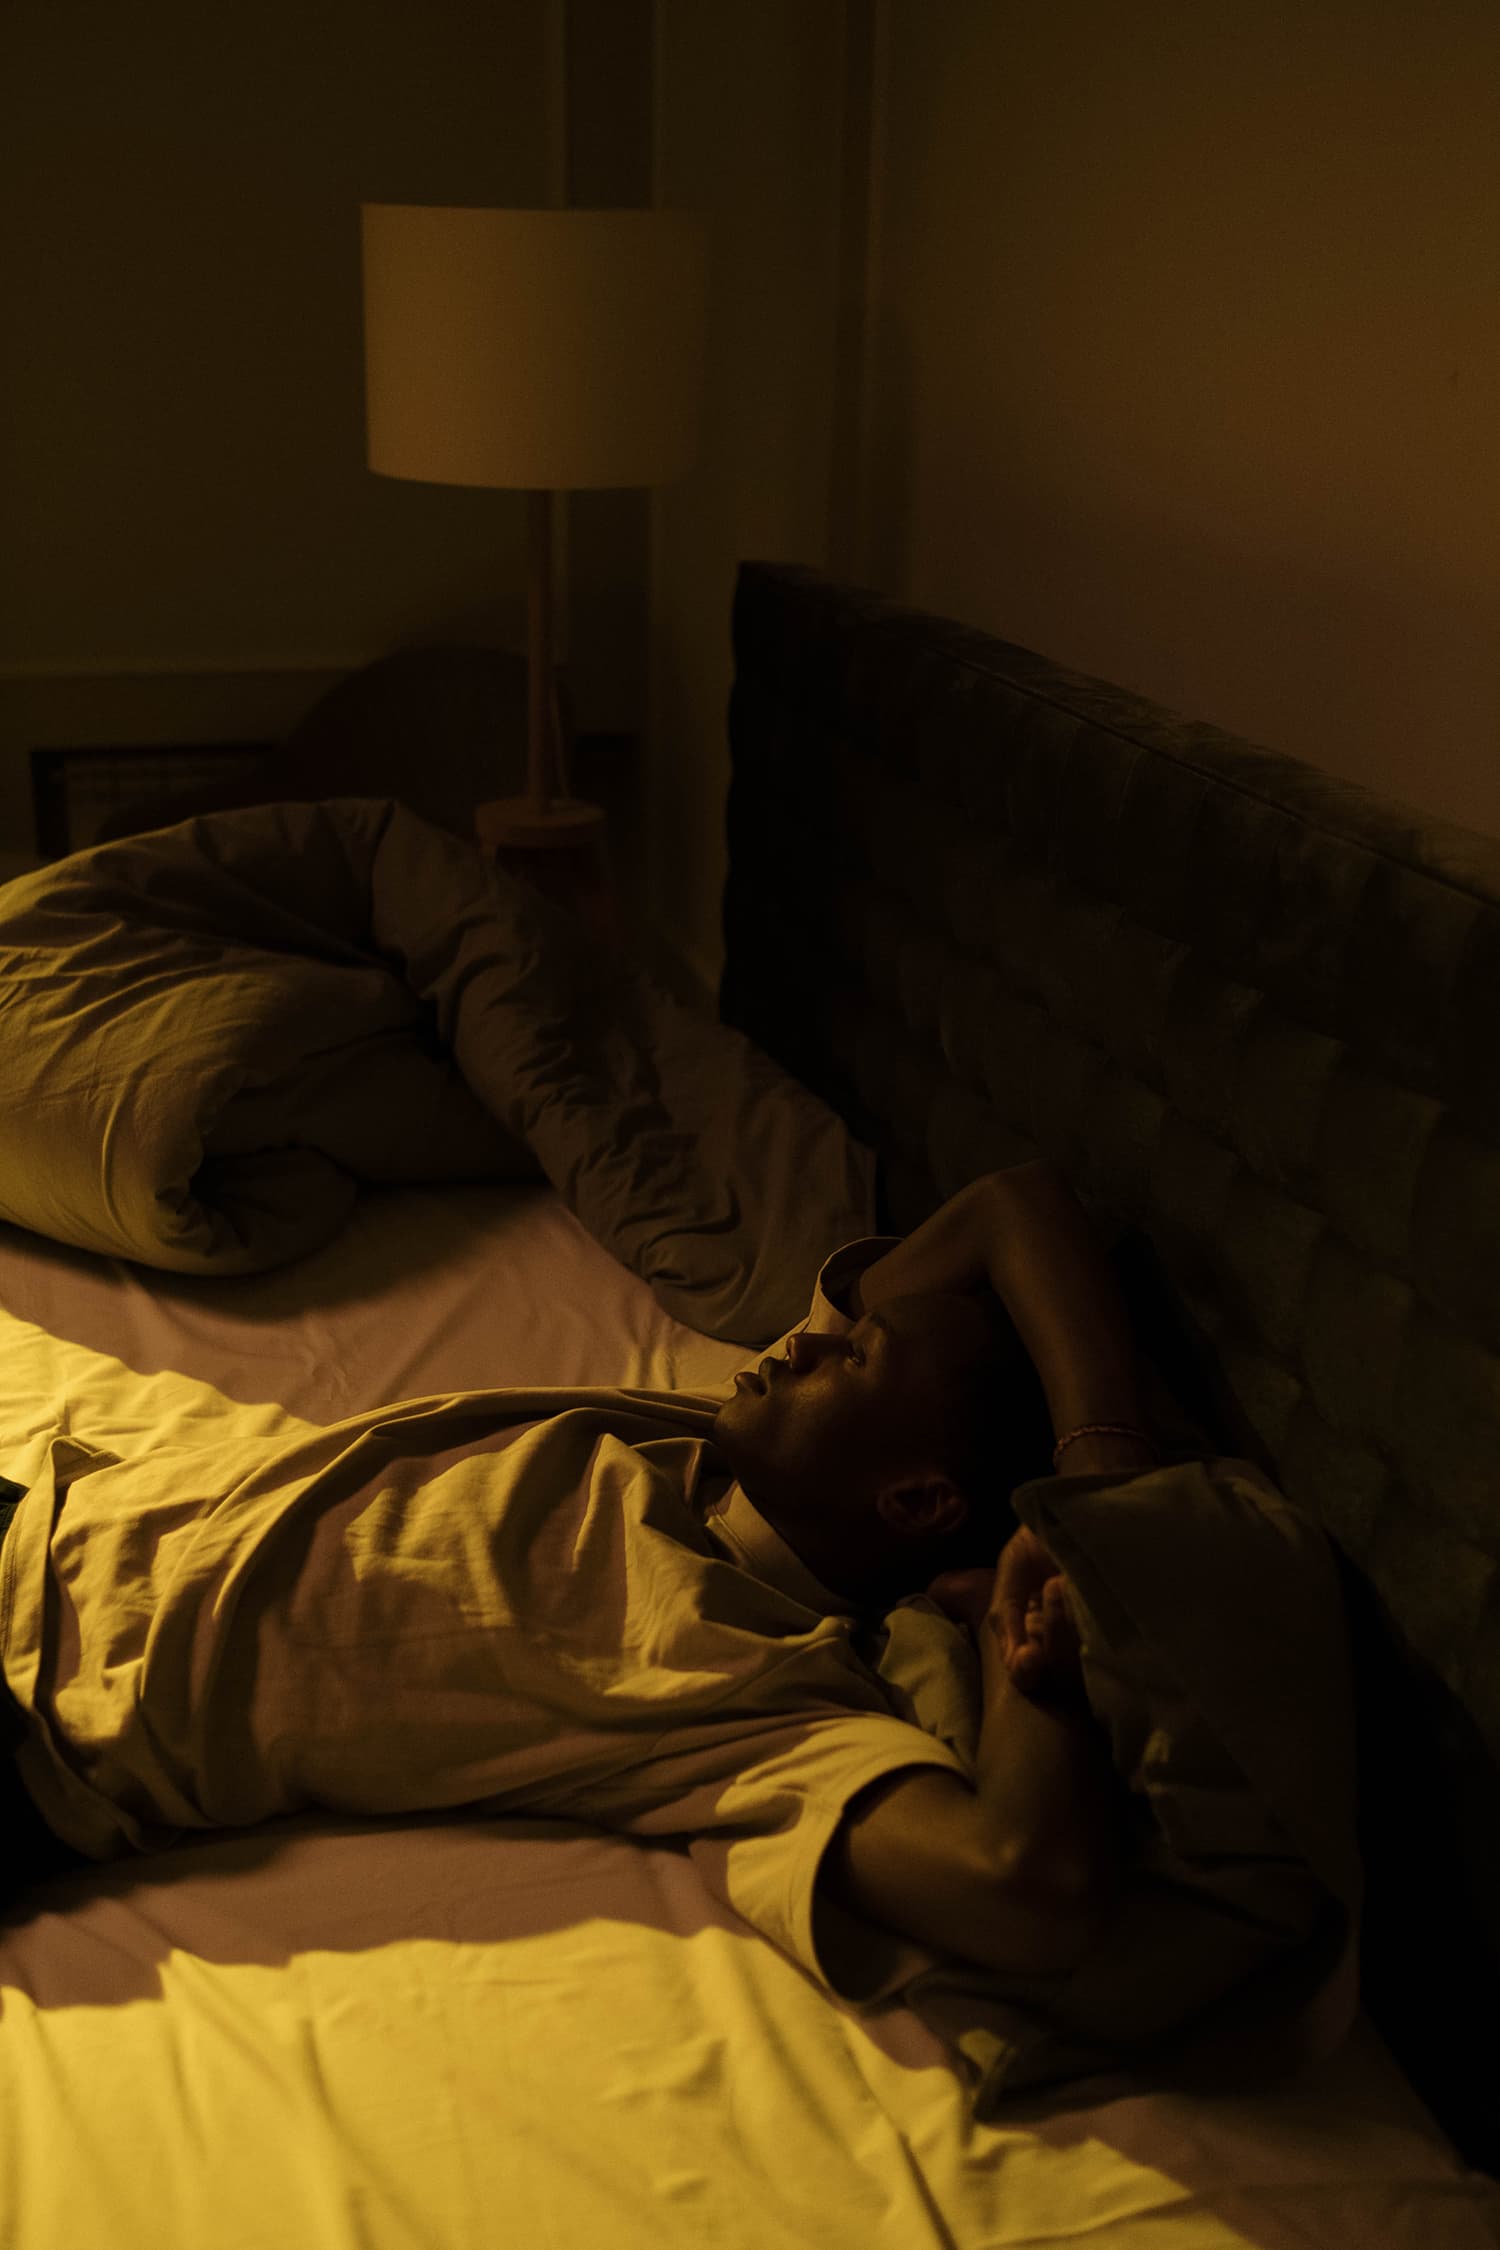 A Man Sitting on the Bed in a Dark Room